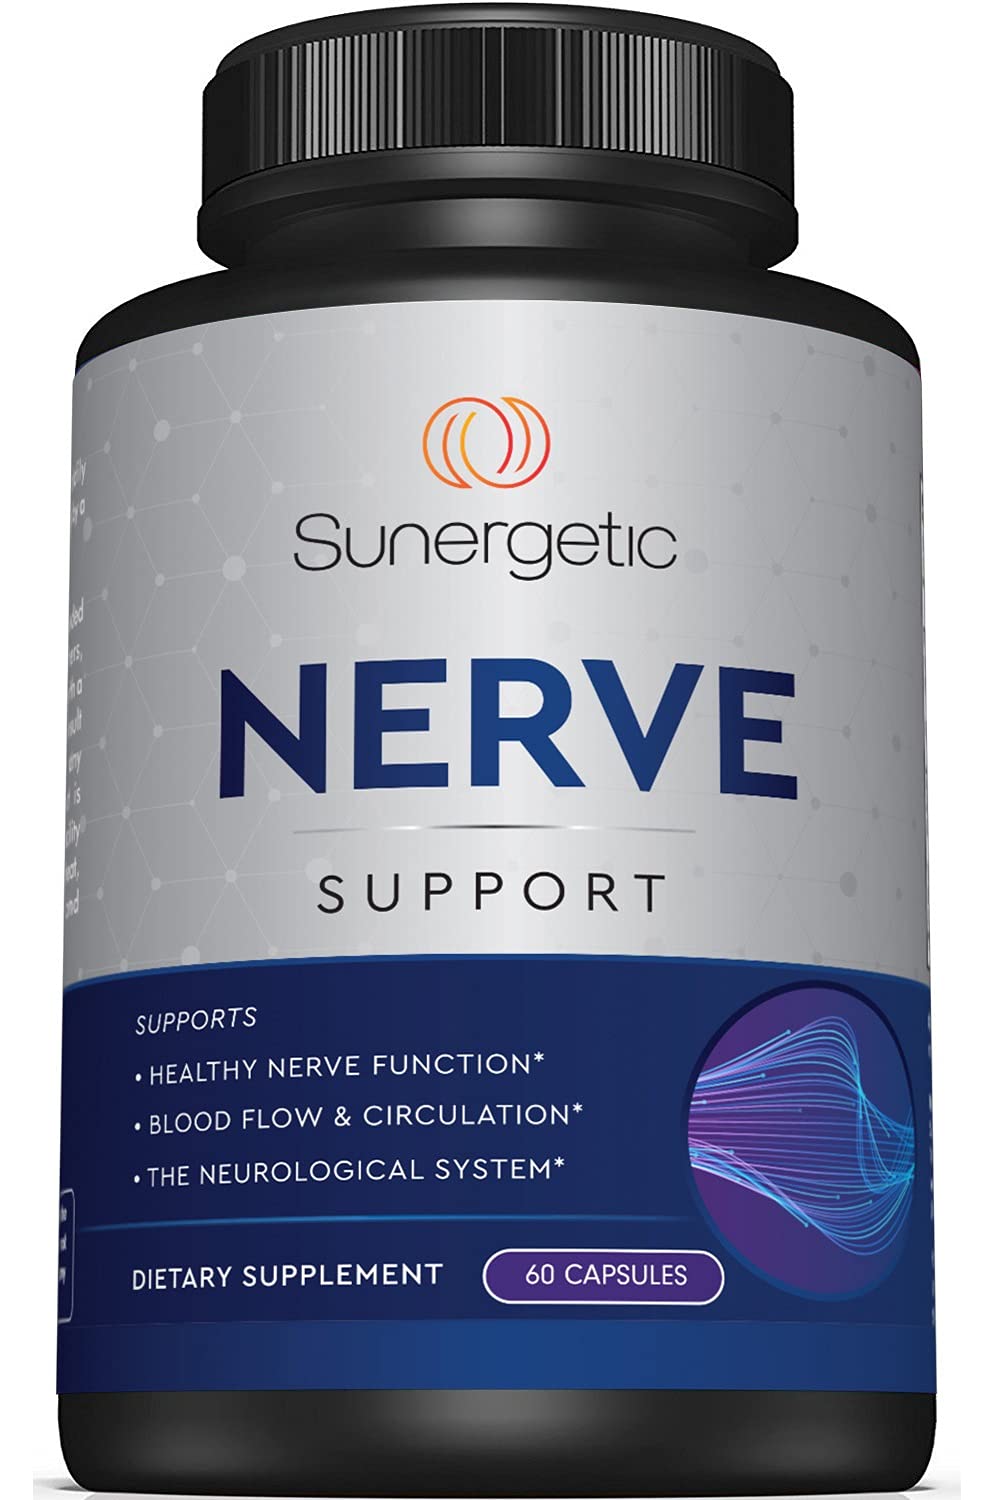 Premium Nerve Support Supplement - with Alpha Lipoic Acid (ALA) 600 mg, Acetyl-L-Carnitine (ALC) & Benfotiamine - Nerve Support Formula for Healthy Circulation, Feet, Hands & Toes - 60 Capsules - image 1 of 3